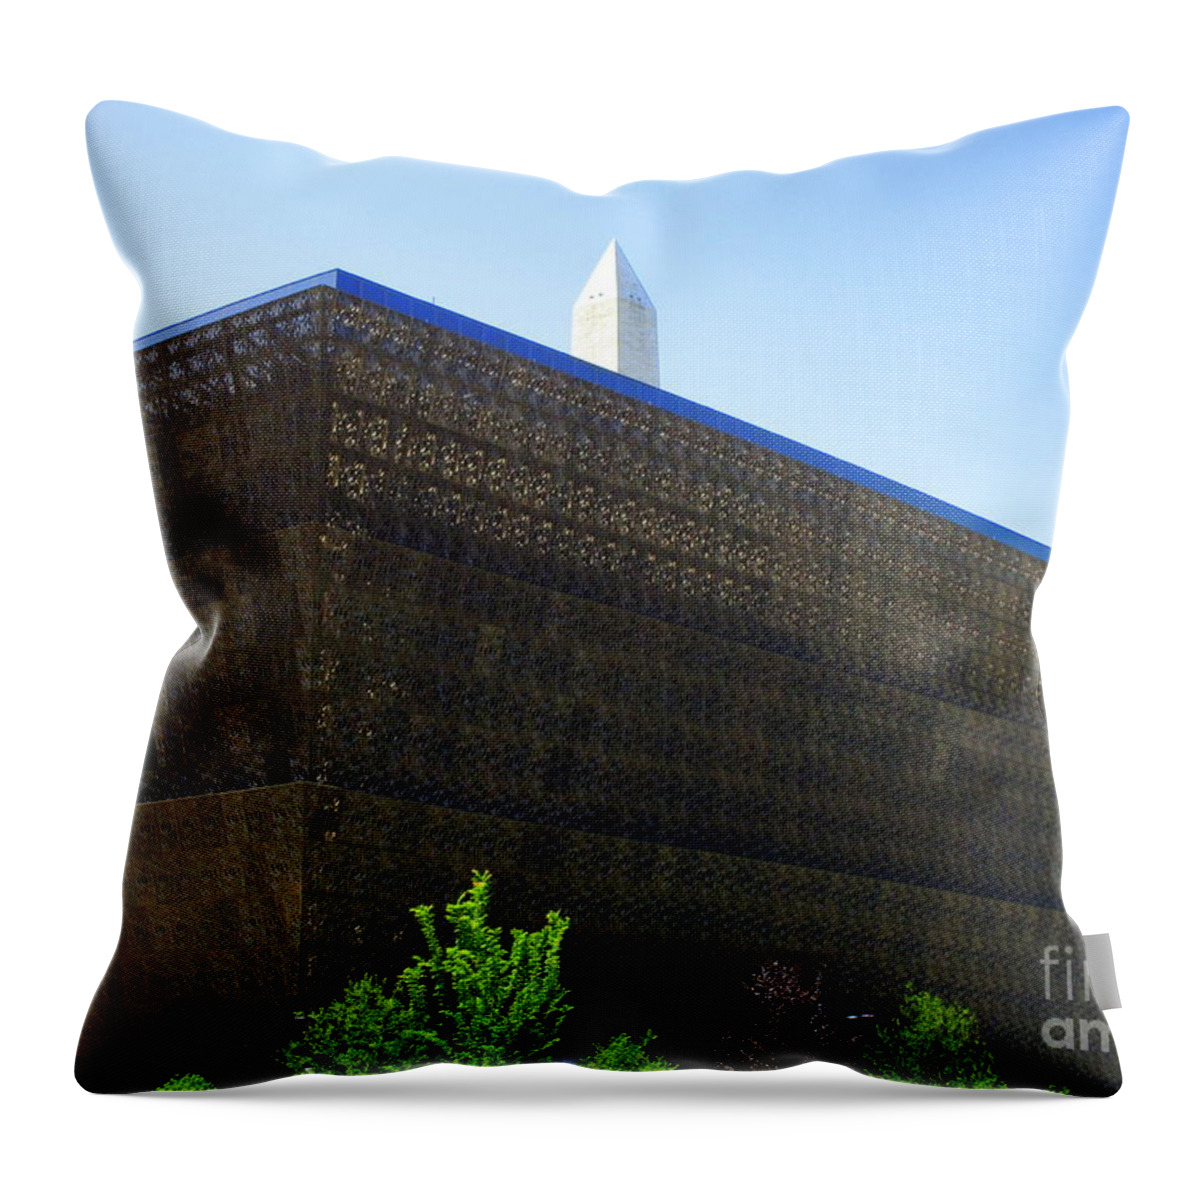 African American History And Culture Throw Pillow featuring the photograph African American History And Culture 1 by Randall Weidner